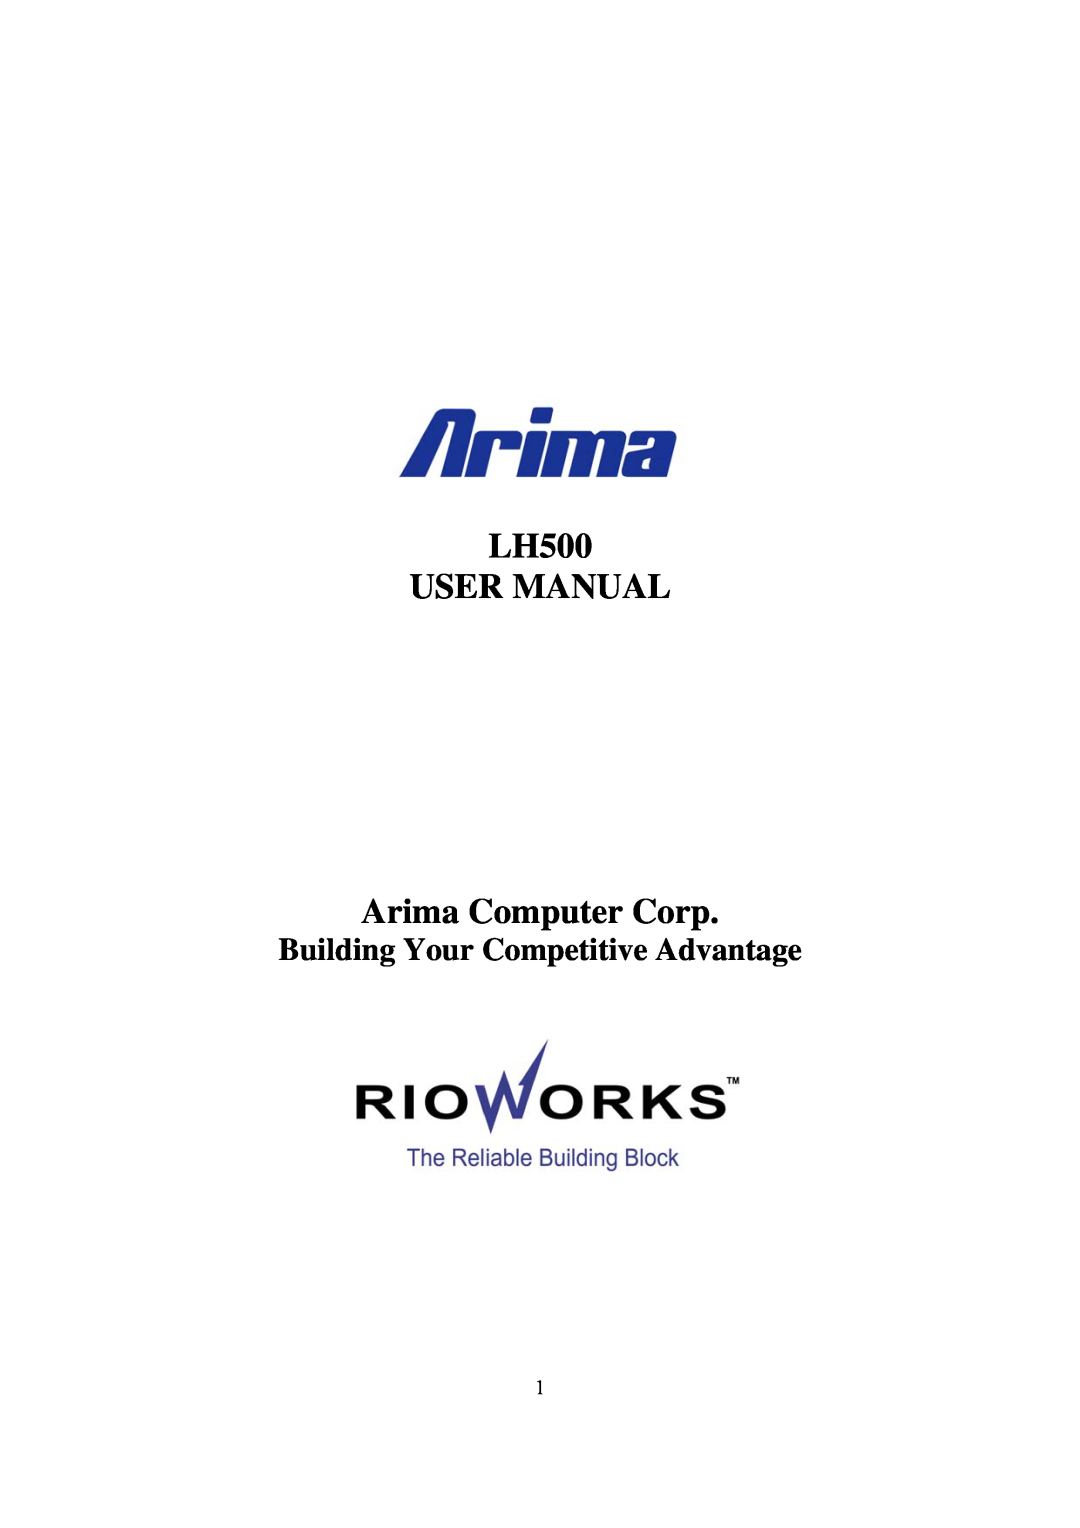 Intel user manual LH500 USER MANUAL Arima Computer Corp, Building Your Competitive Advantage 